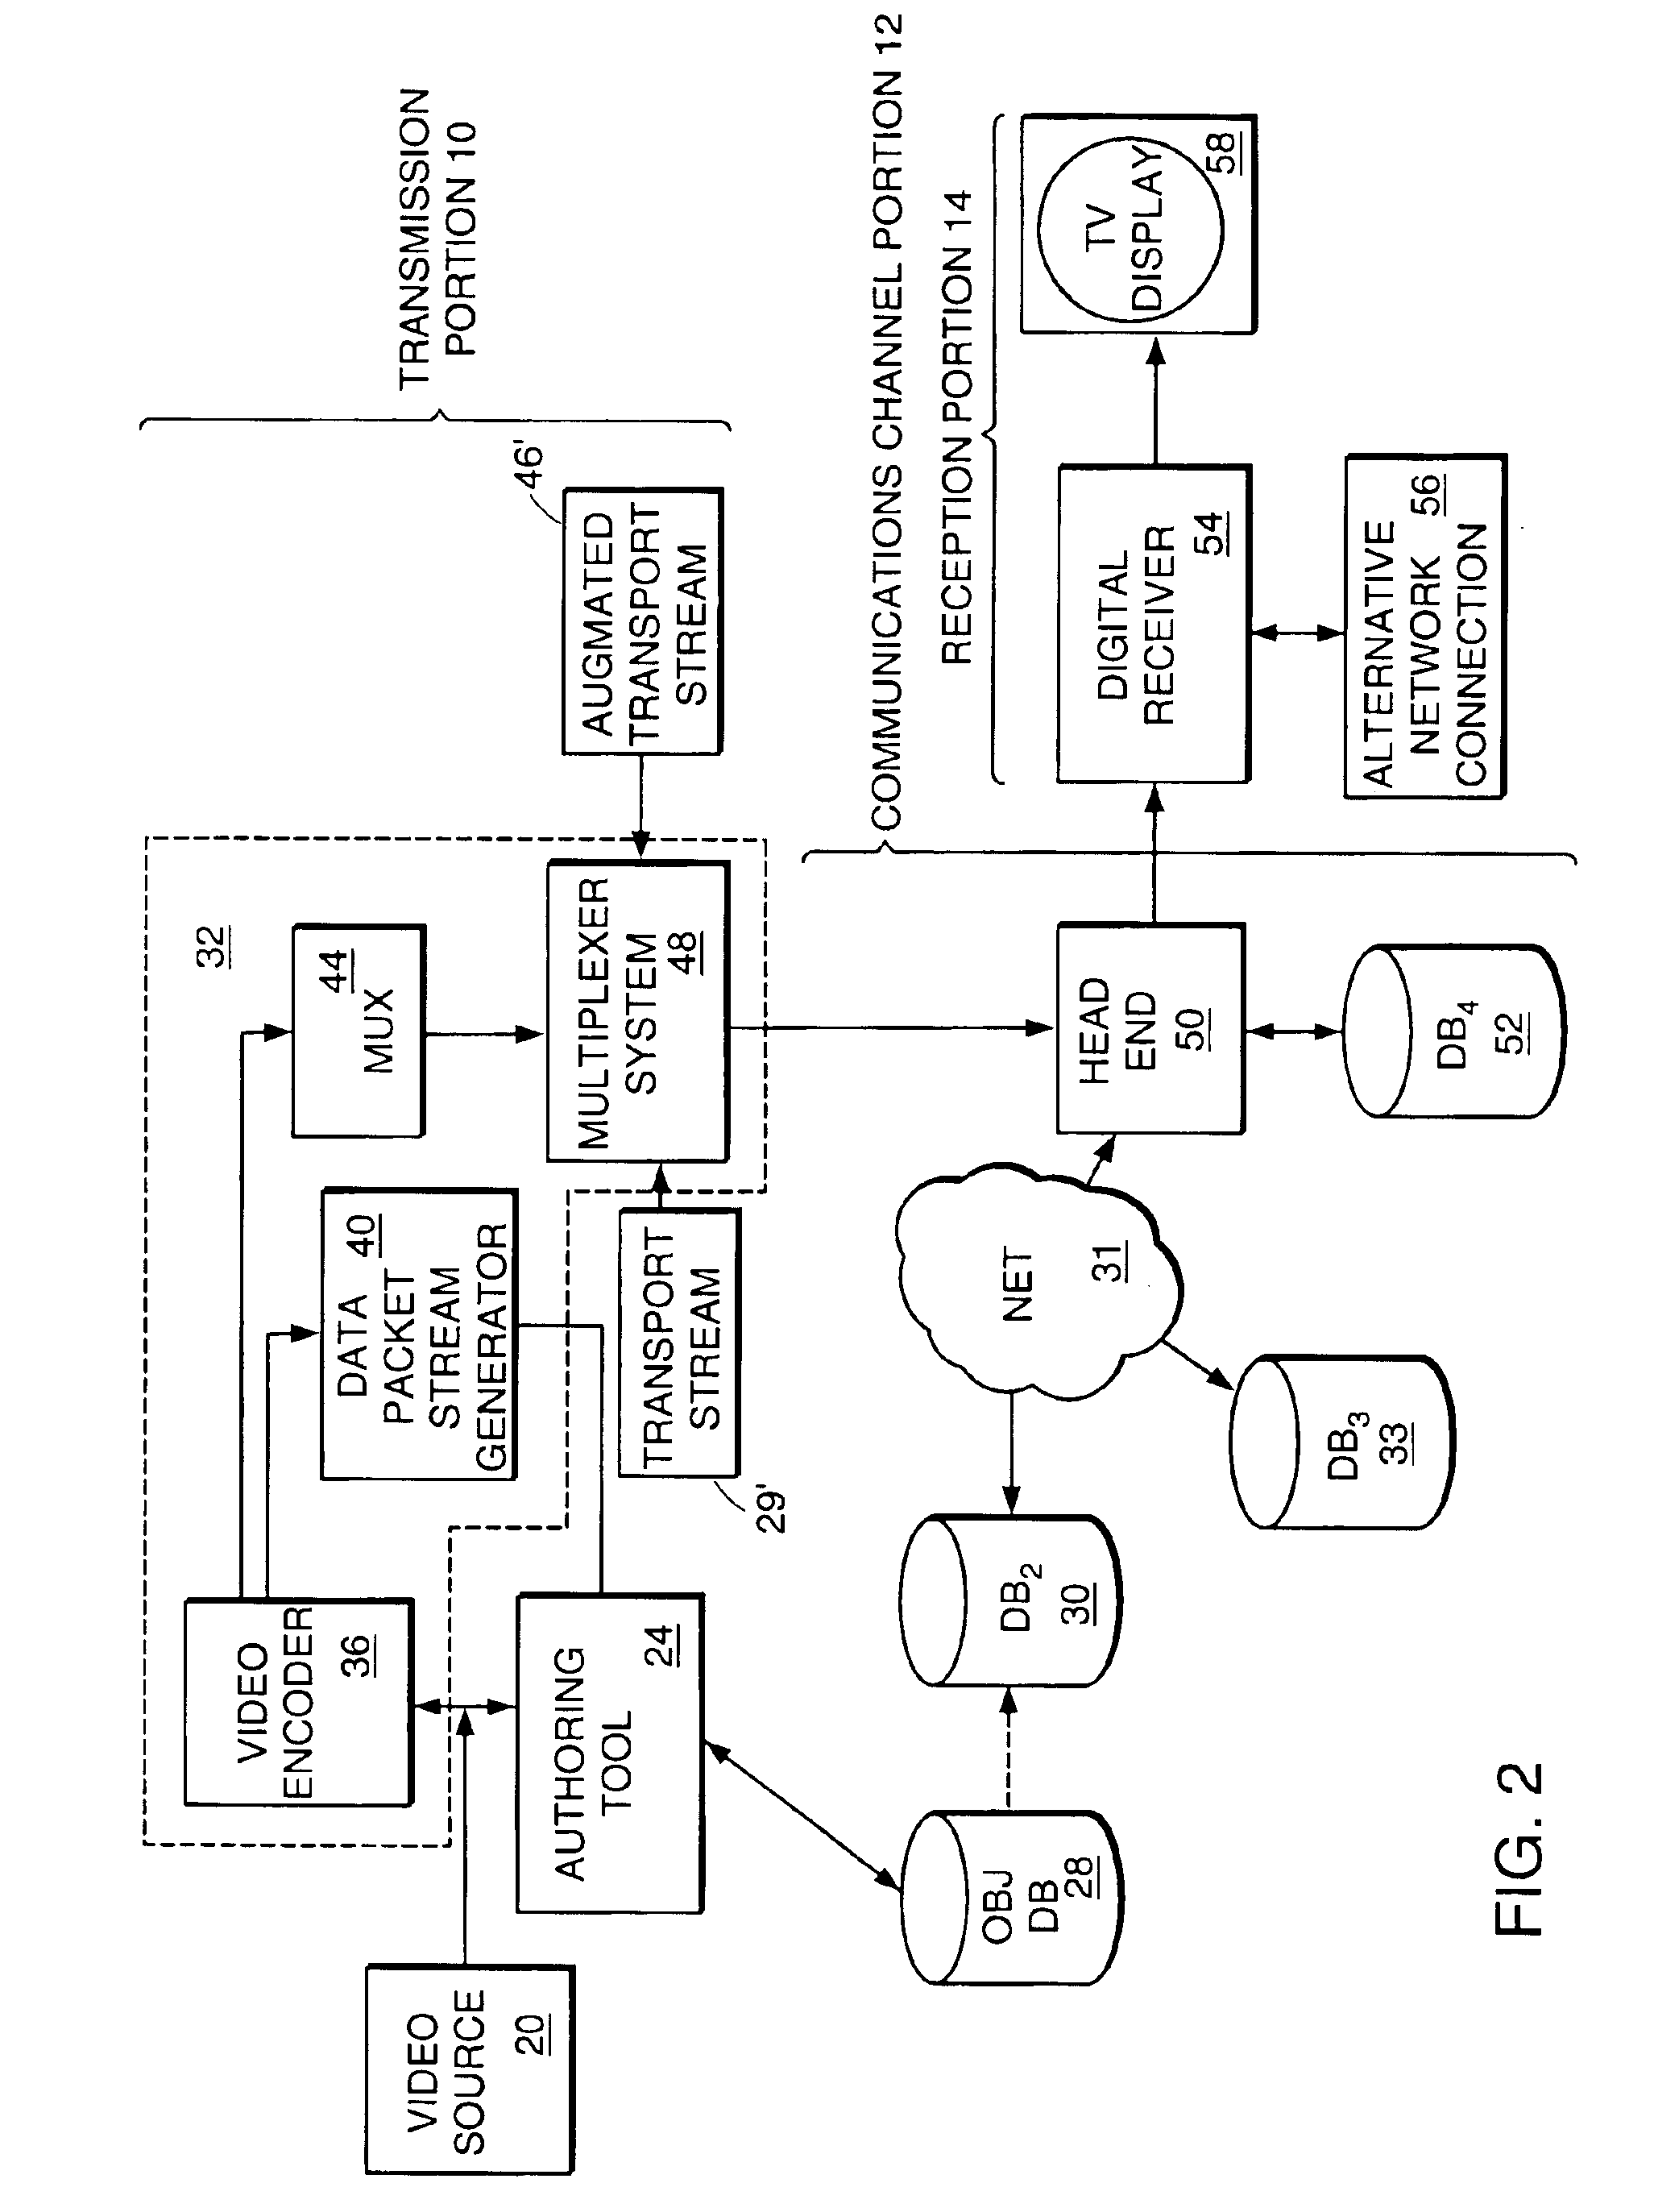 Method and apparatus for encoding video hyperlinks